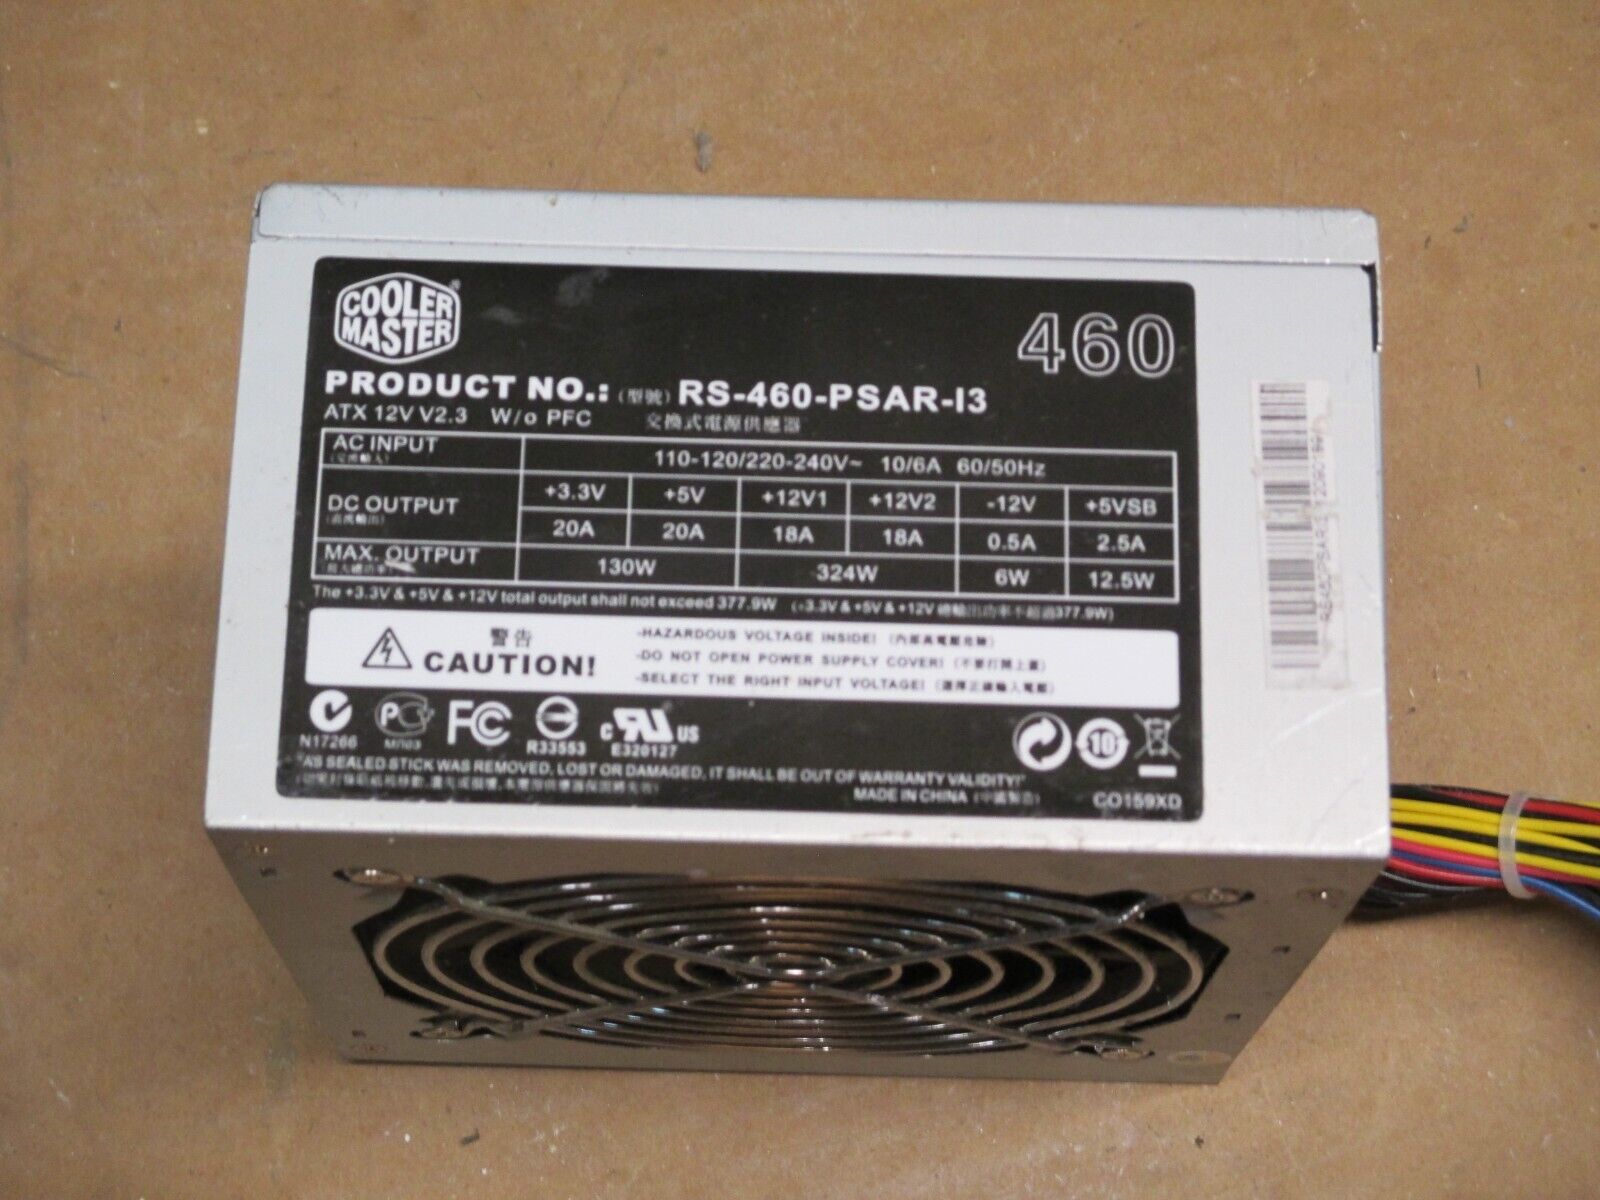 COOLER MASTER RS-460-PSAR-13 ATX 12V 460W POWER SUPPLY